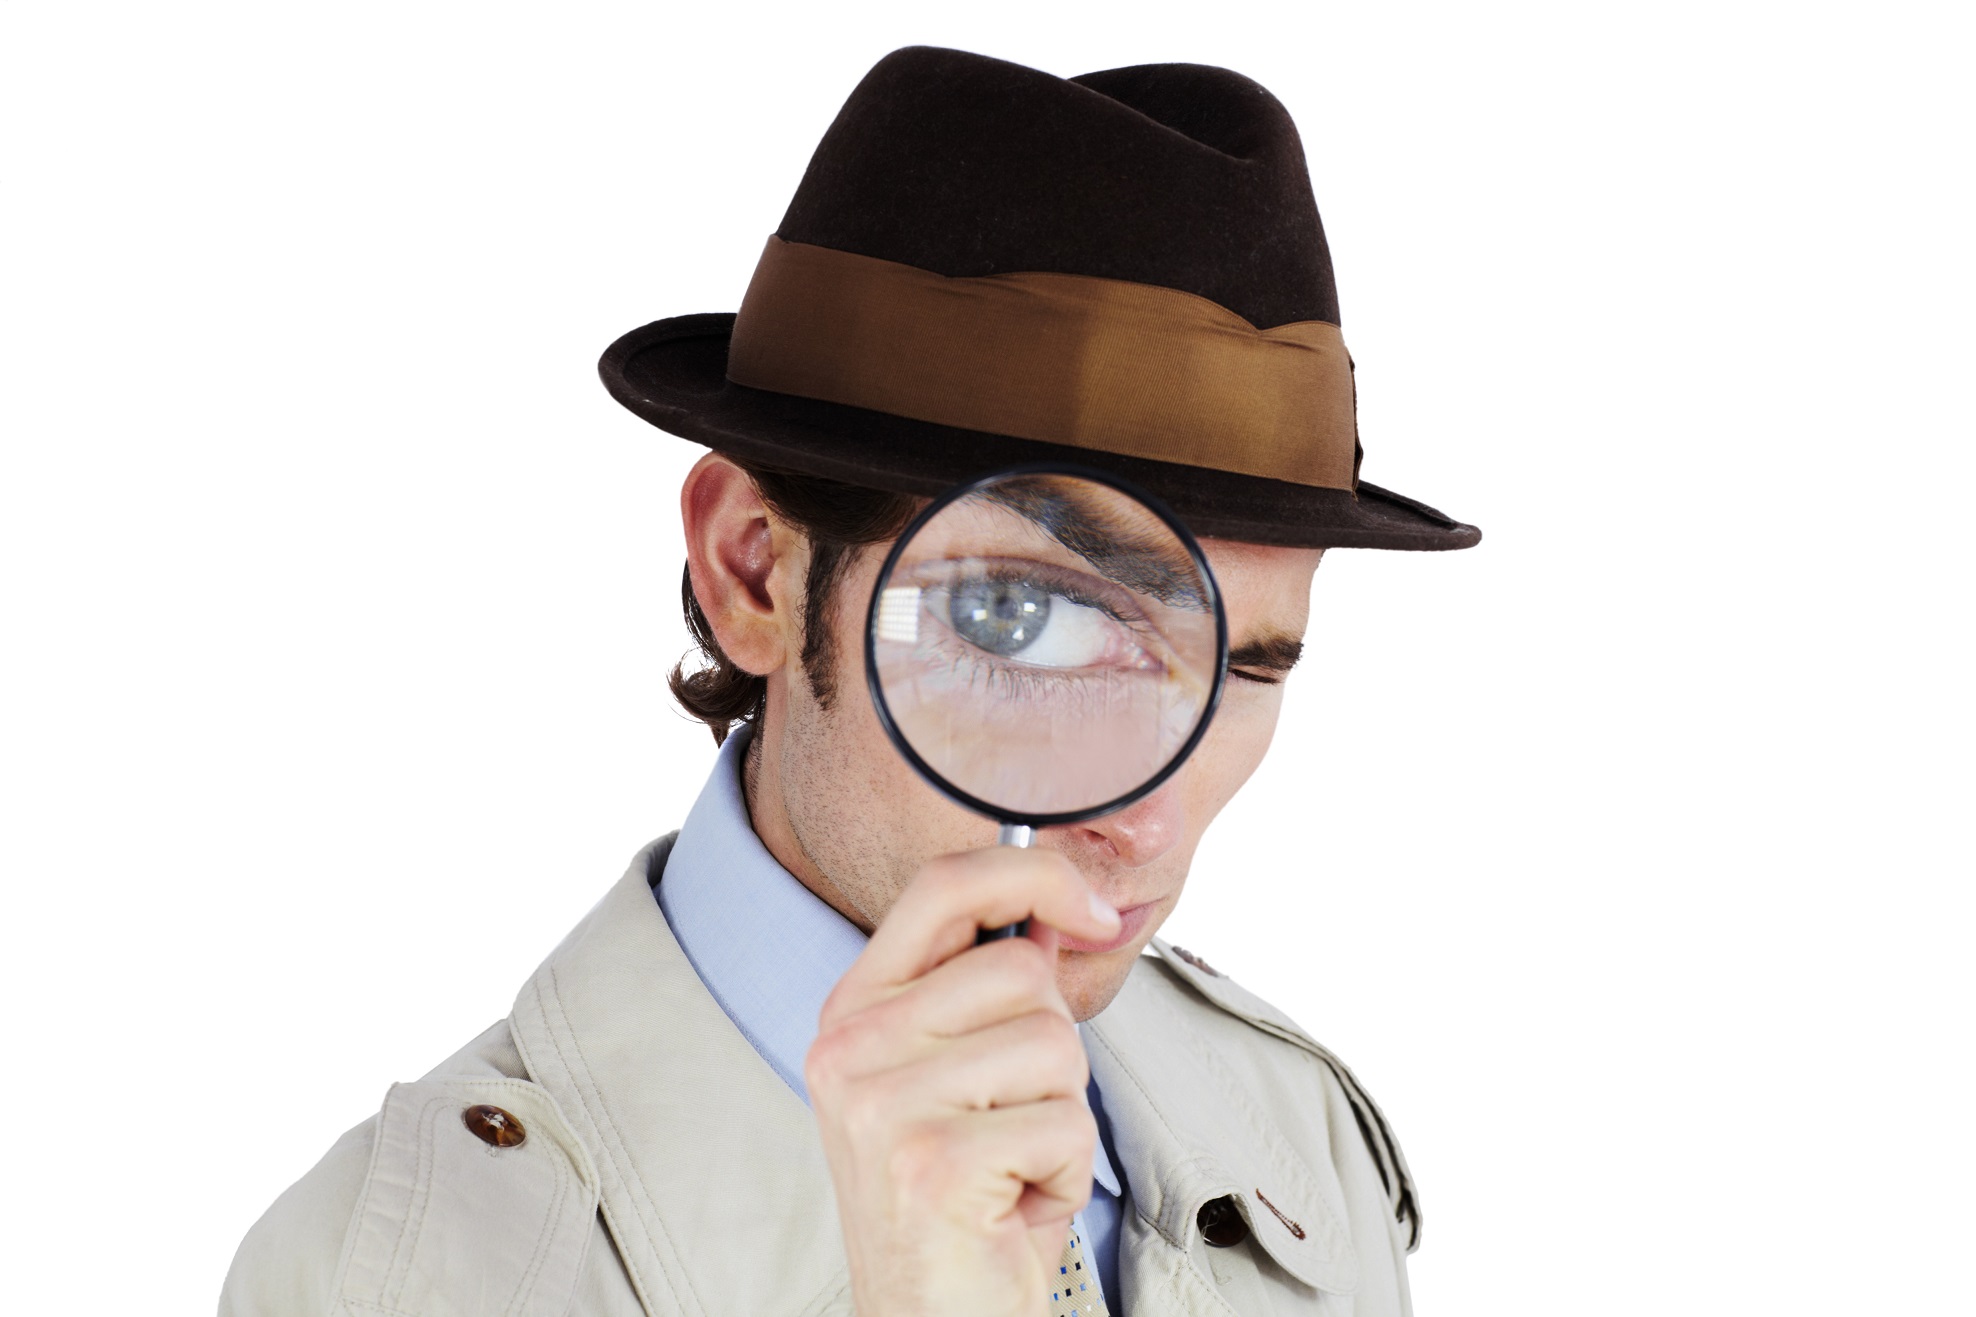 Looking into the life of a private investigator